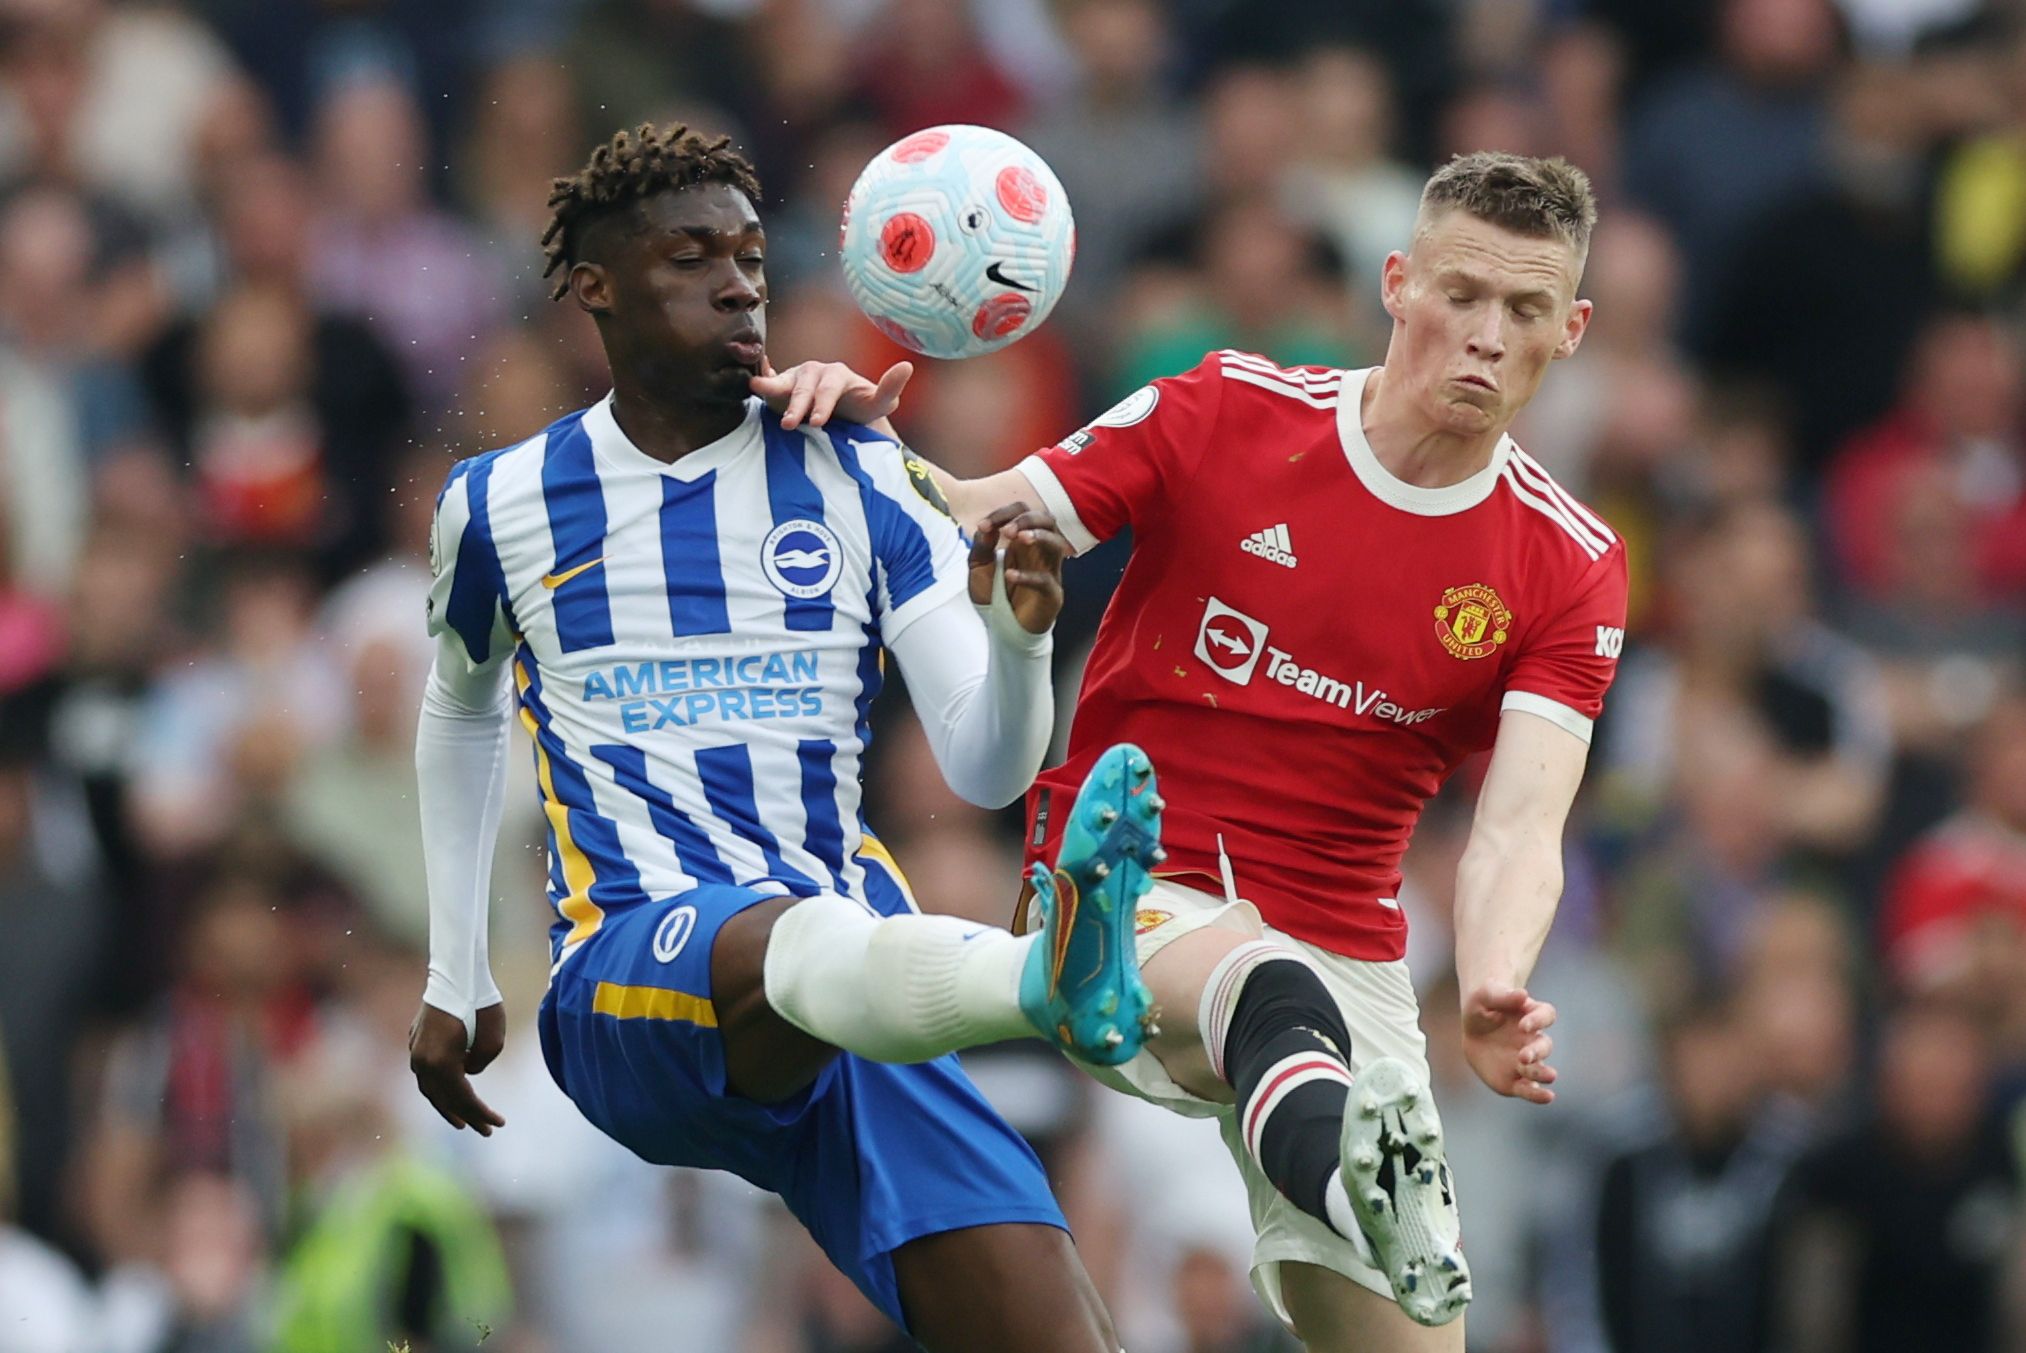 yves-bissouma-brighton-vs-manchester-united-transfer-news-bissouma-fabrizio-romano-latest-frenkie-de-jong-ten-hag-dealSoccer Football - Premier League - Brighton &amp; Hove Albion v Manchester United - The American Express Community Stadium, Brighton, Britain - May 7, 2022 Brighton &amp; Hove Albion's Yves Bissouma in action with Manchester United's Scott McTominay Action Images via Reuters/Matthew Childs EDITORIAL USE ONLY. No use with unauthorized audio, video, data, fixture lists, club/league